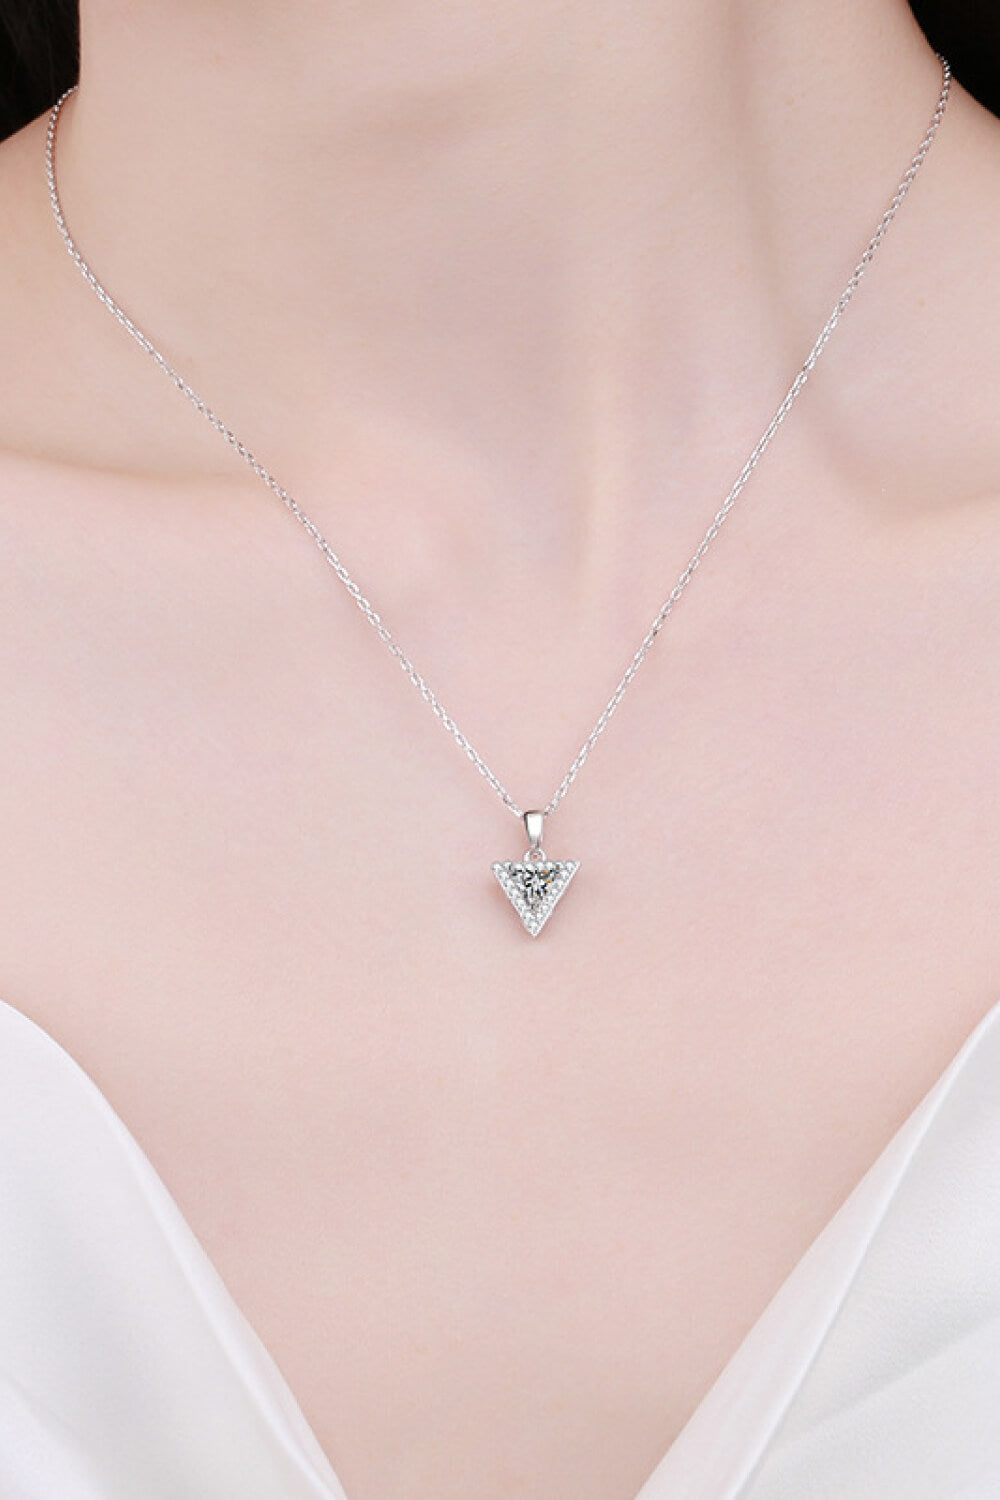 925 Sterling Silver Triangle Moissanite Pendant Necklace - Necklaces - FITGGINS